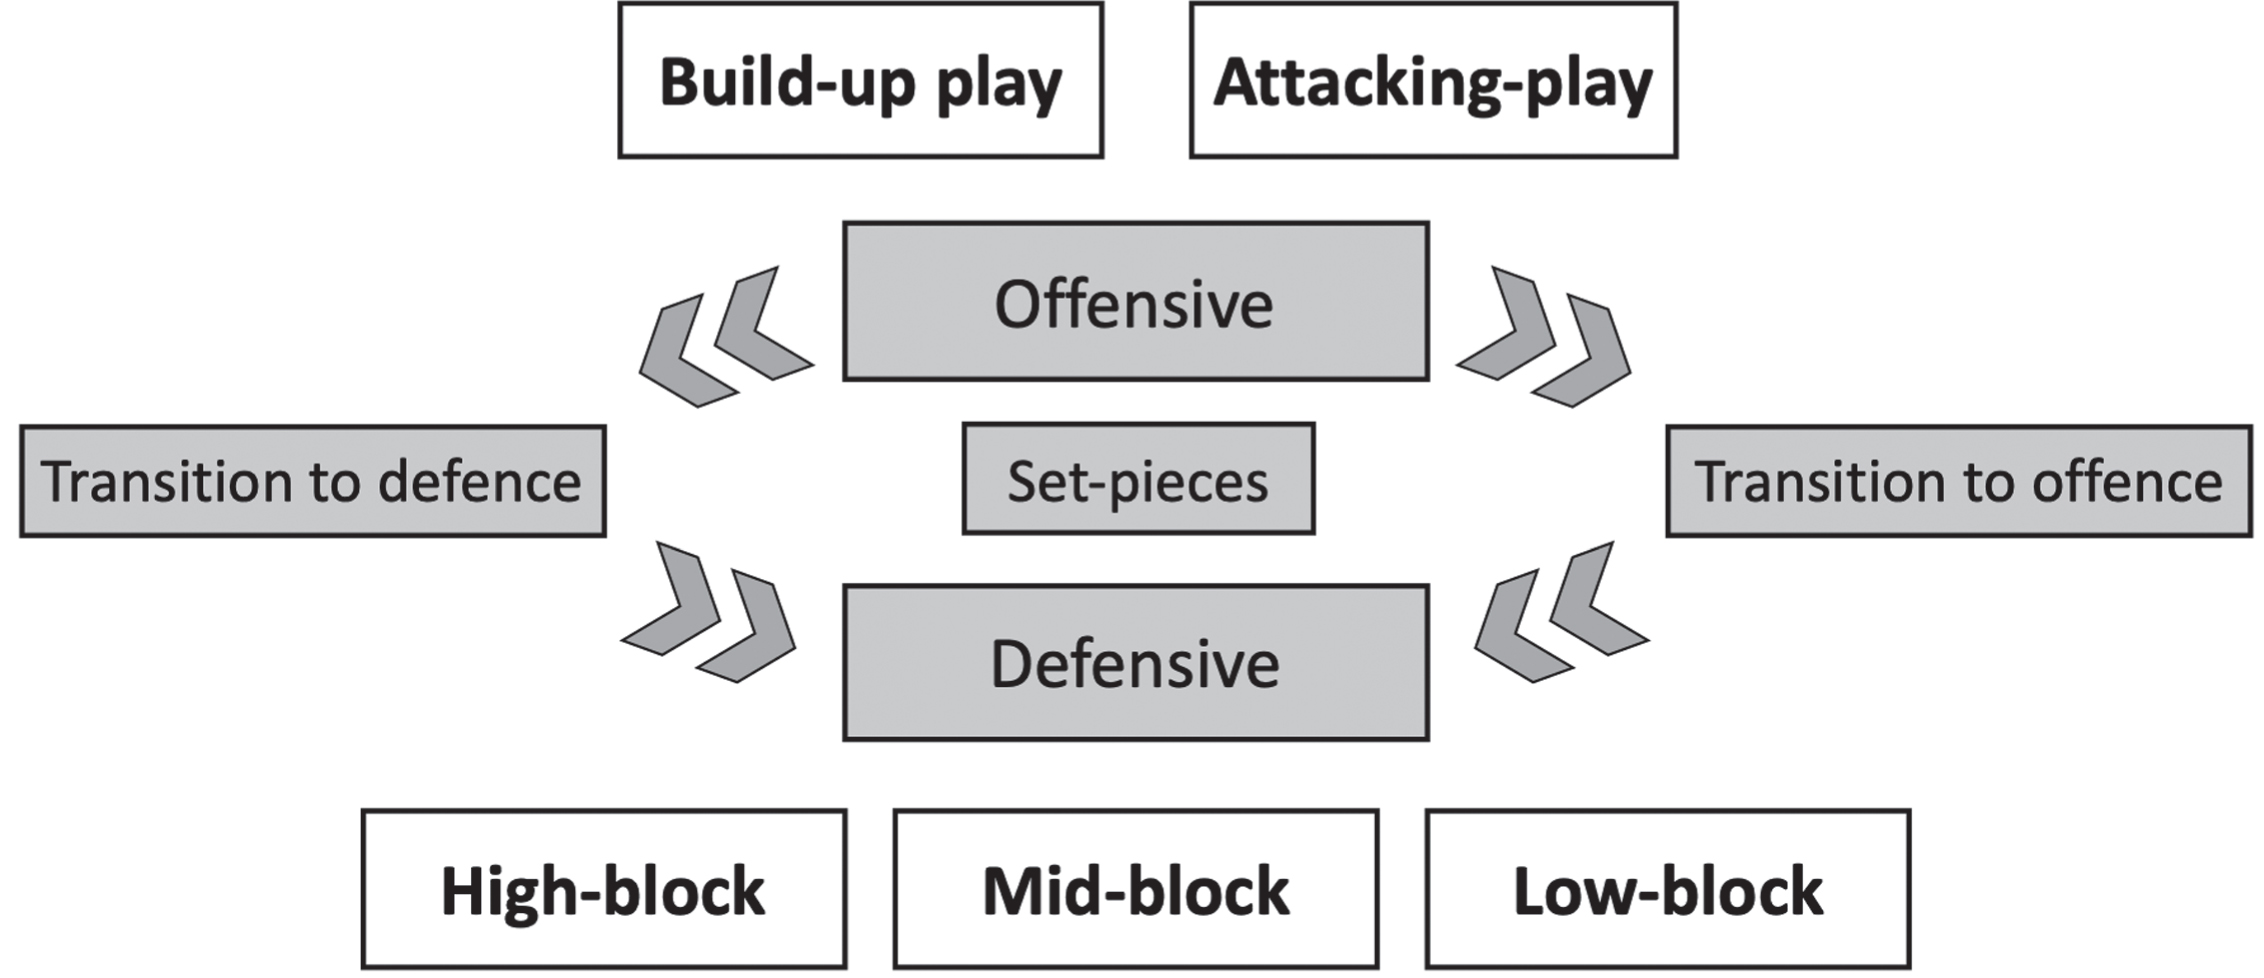 Overview of tactical phases of play considered.